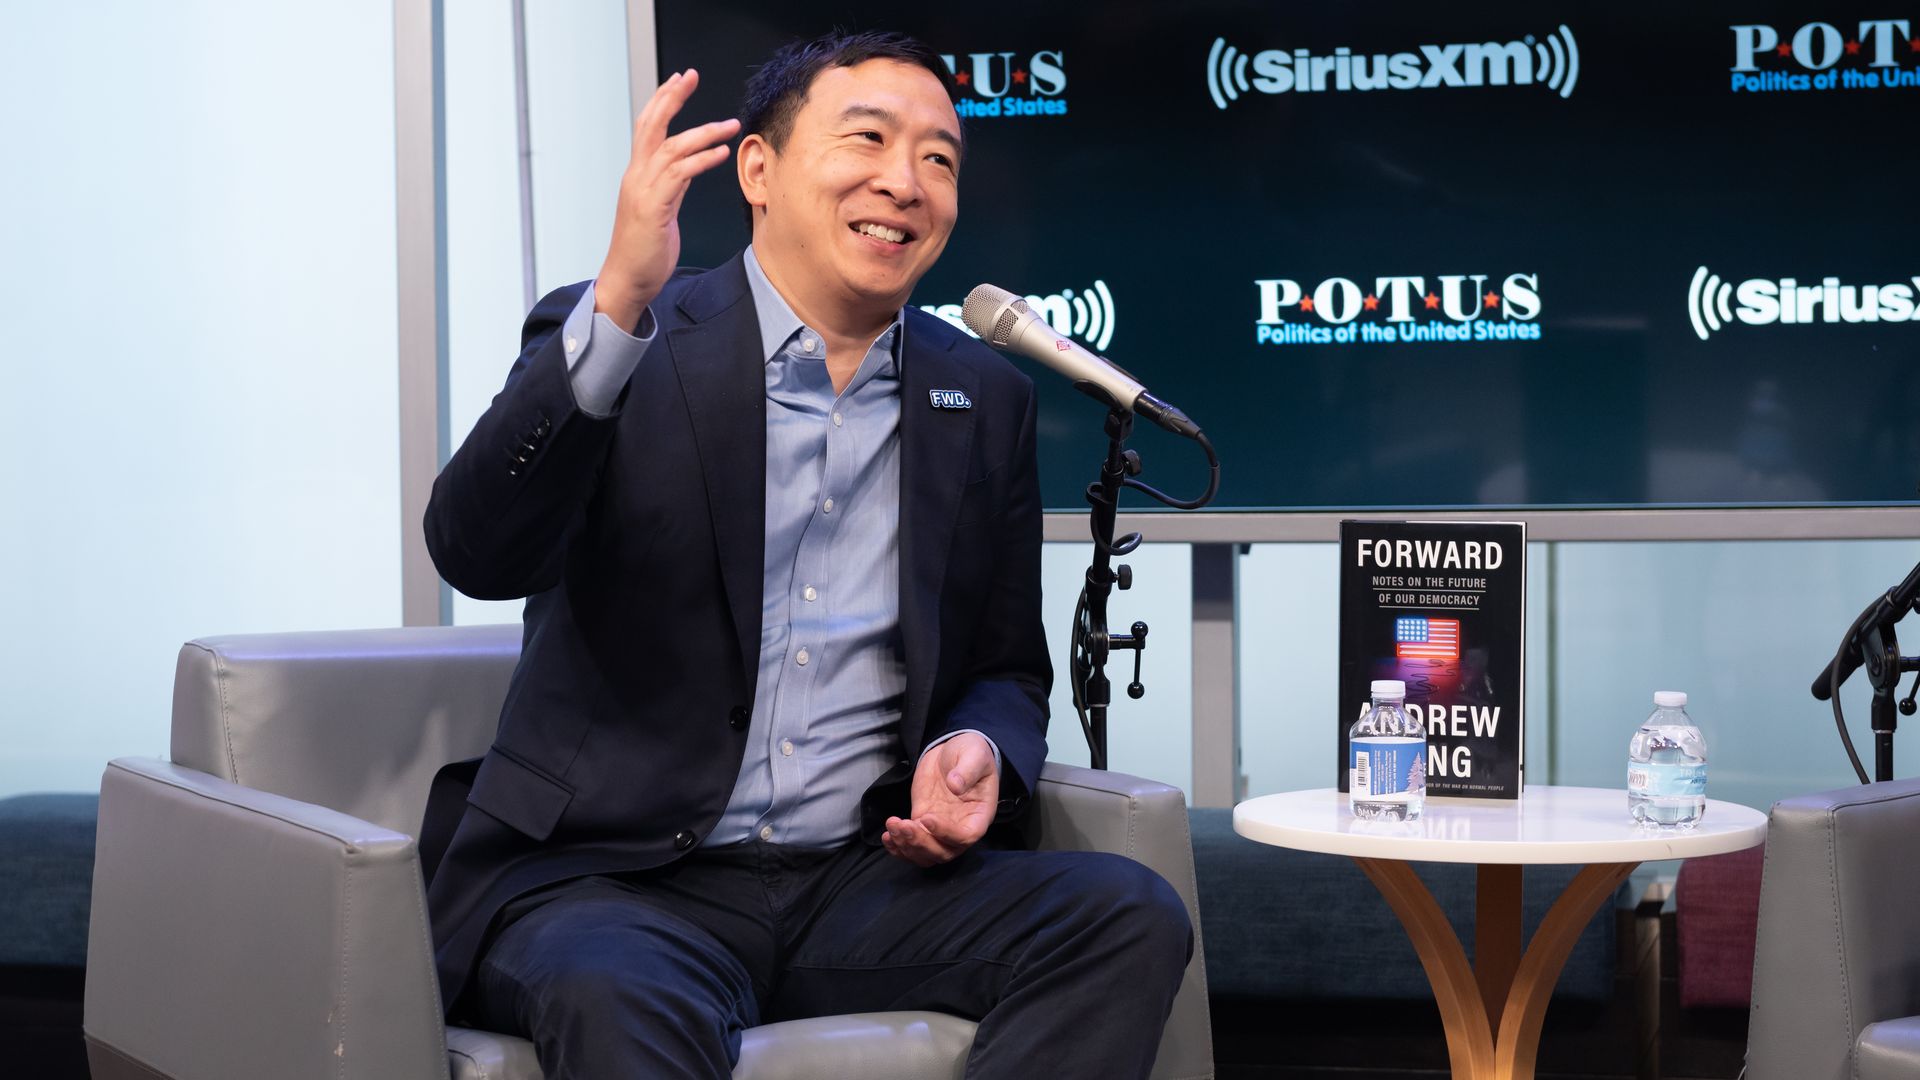 Andrew Yang attends a Town Hall event with SiriusXM's Laura Coates at the SiriusXM Studios on May 17.